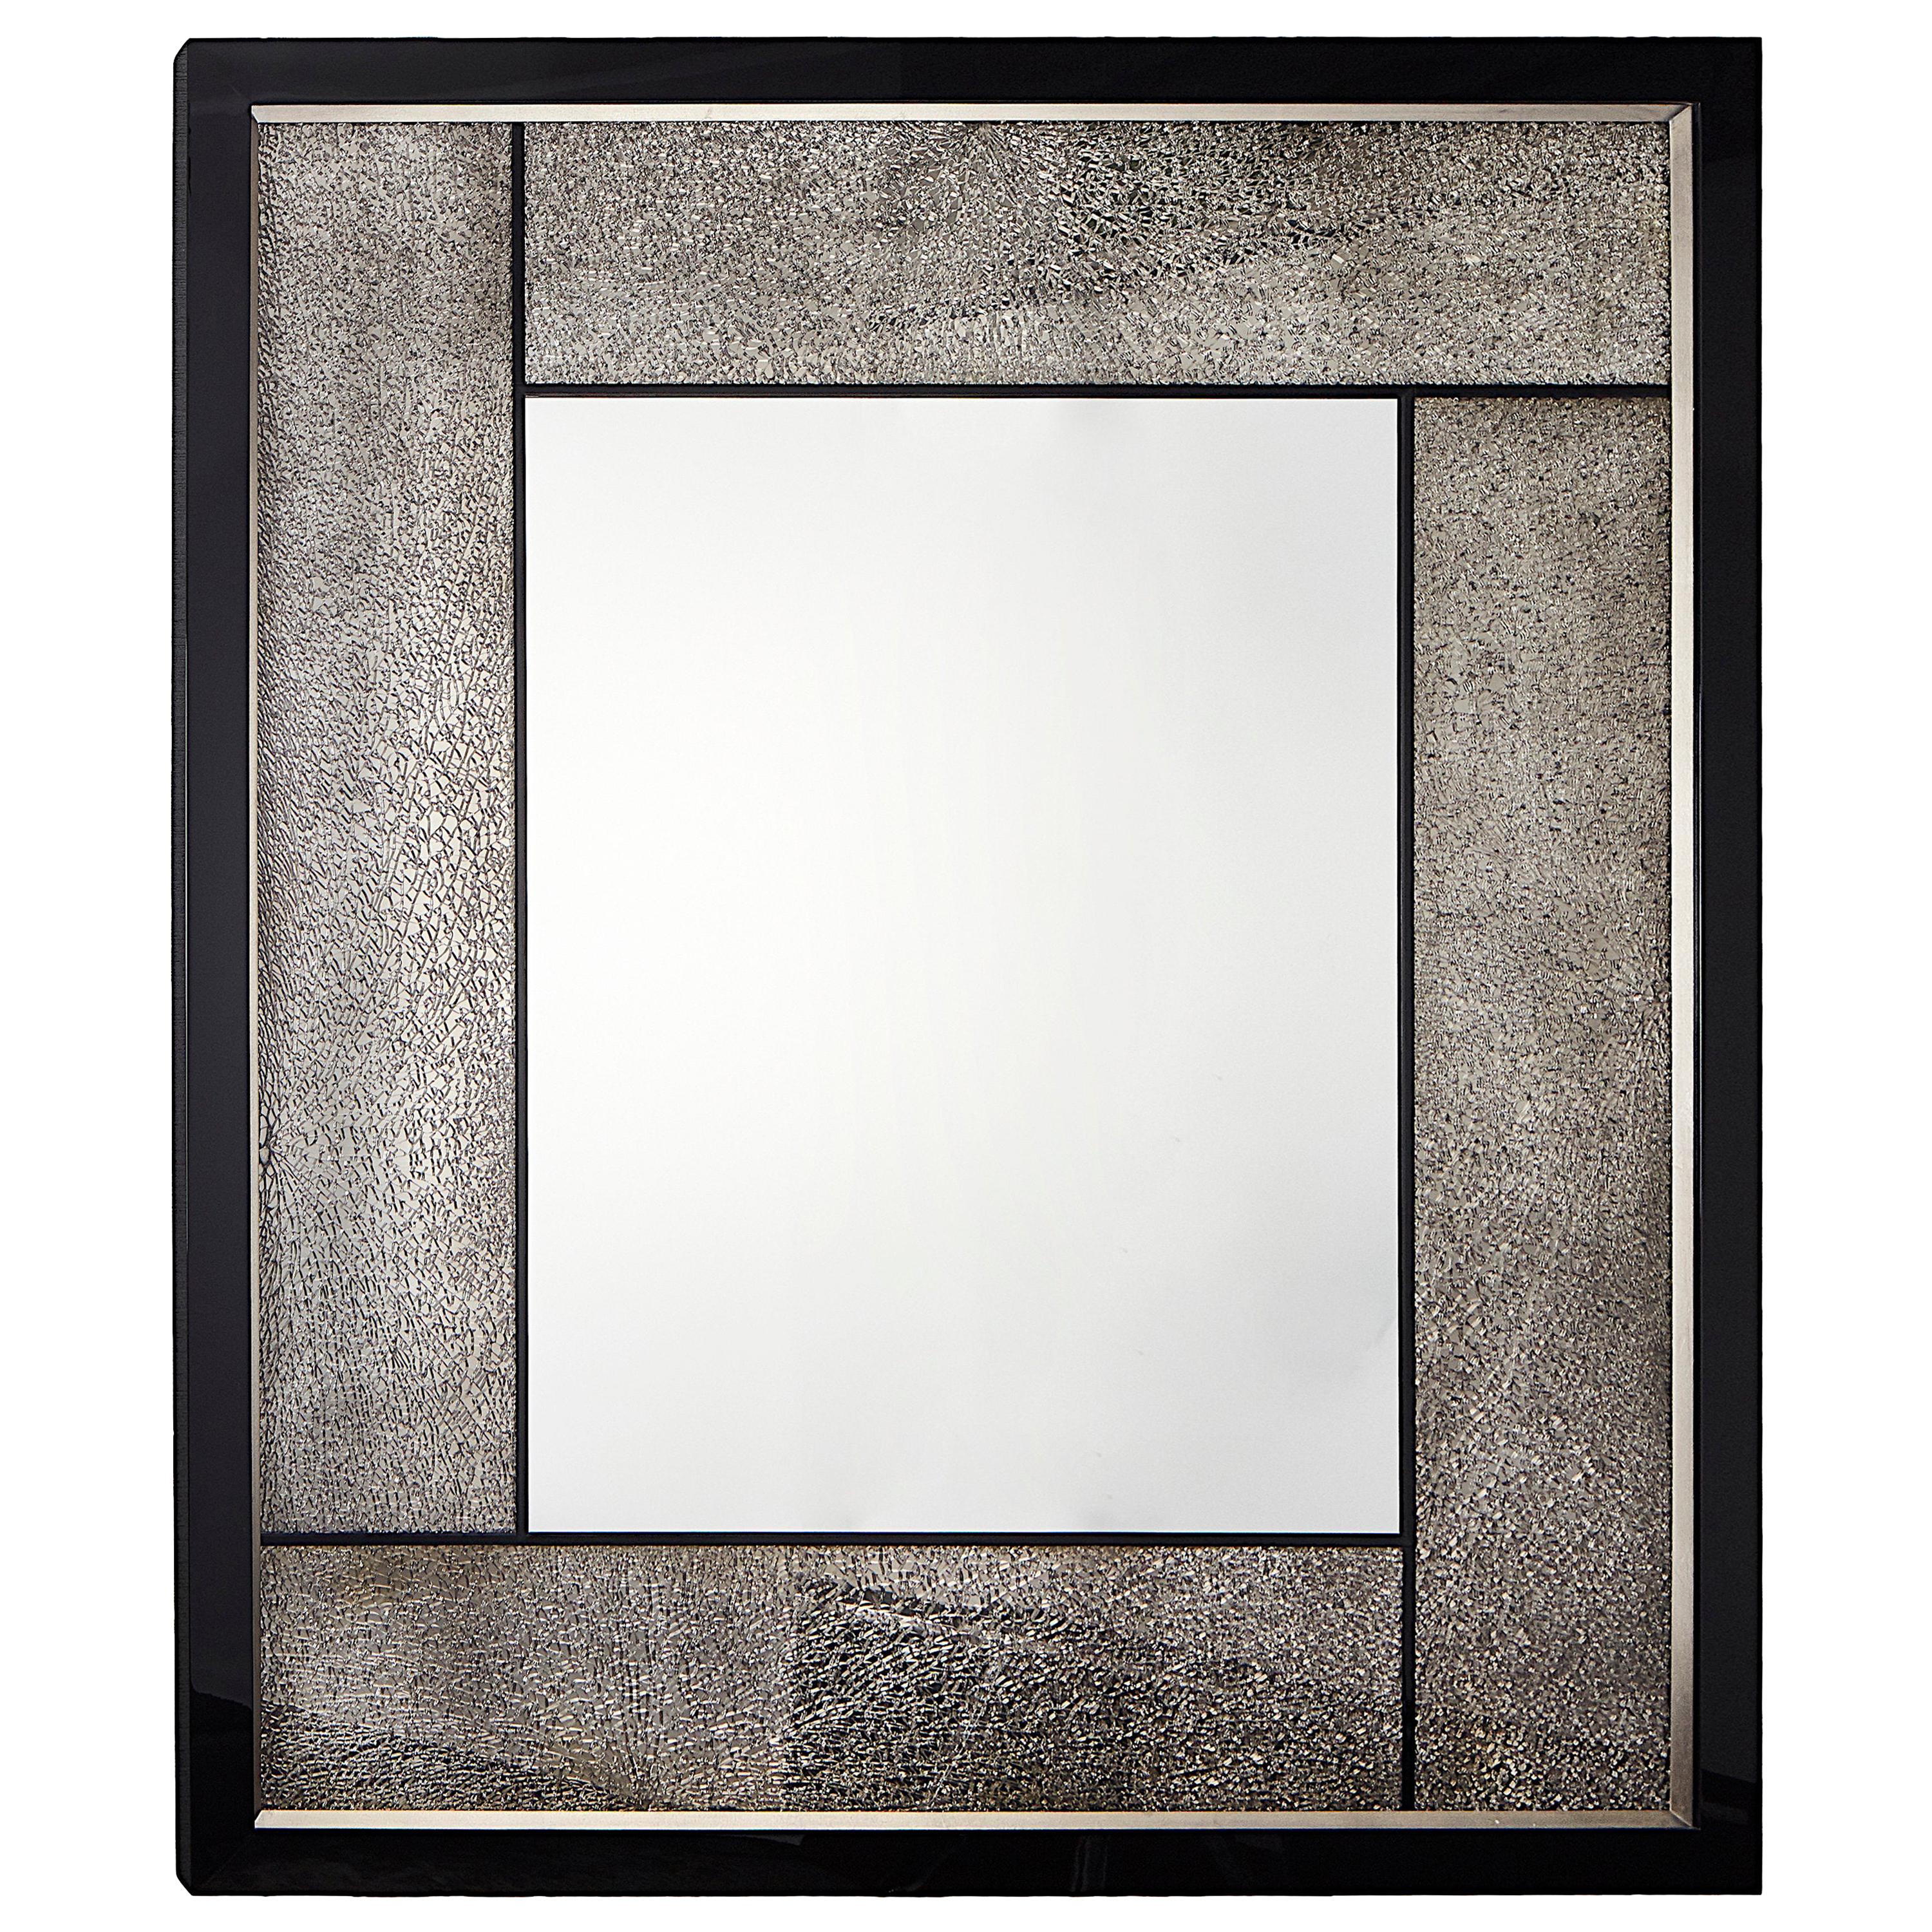 Big Mirror with Cracked Glass and Piano Black/Silver Frame, Available Now im Angebot